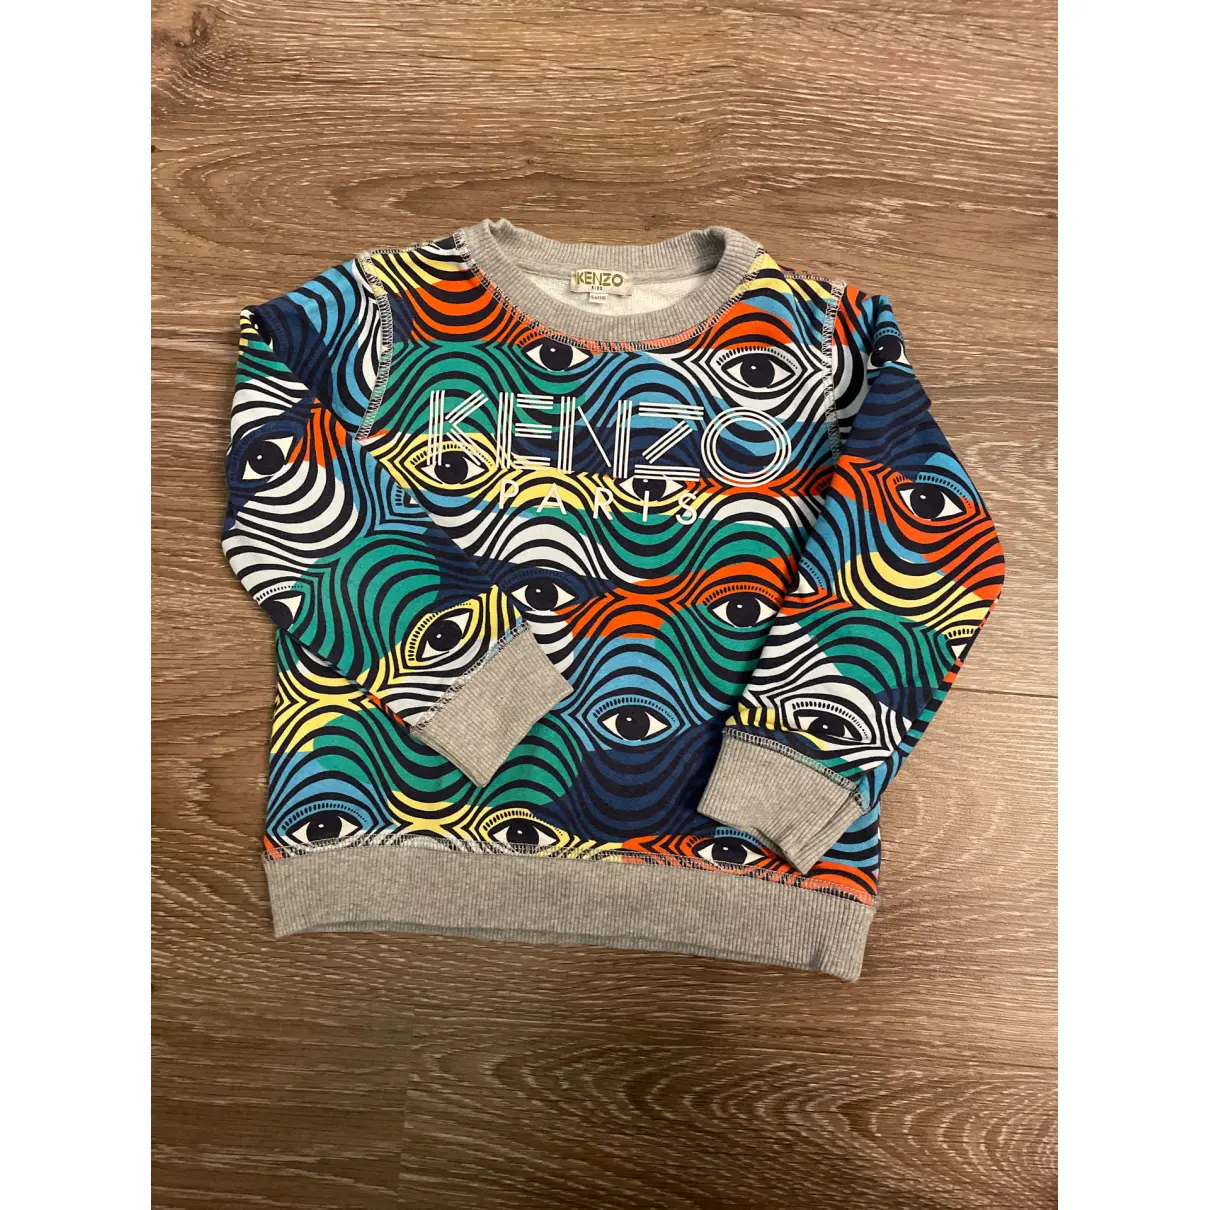 Outfit Kenzo